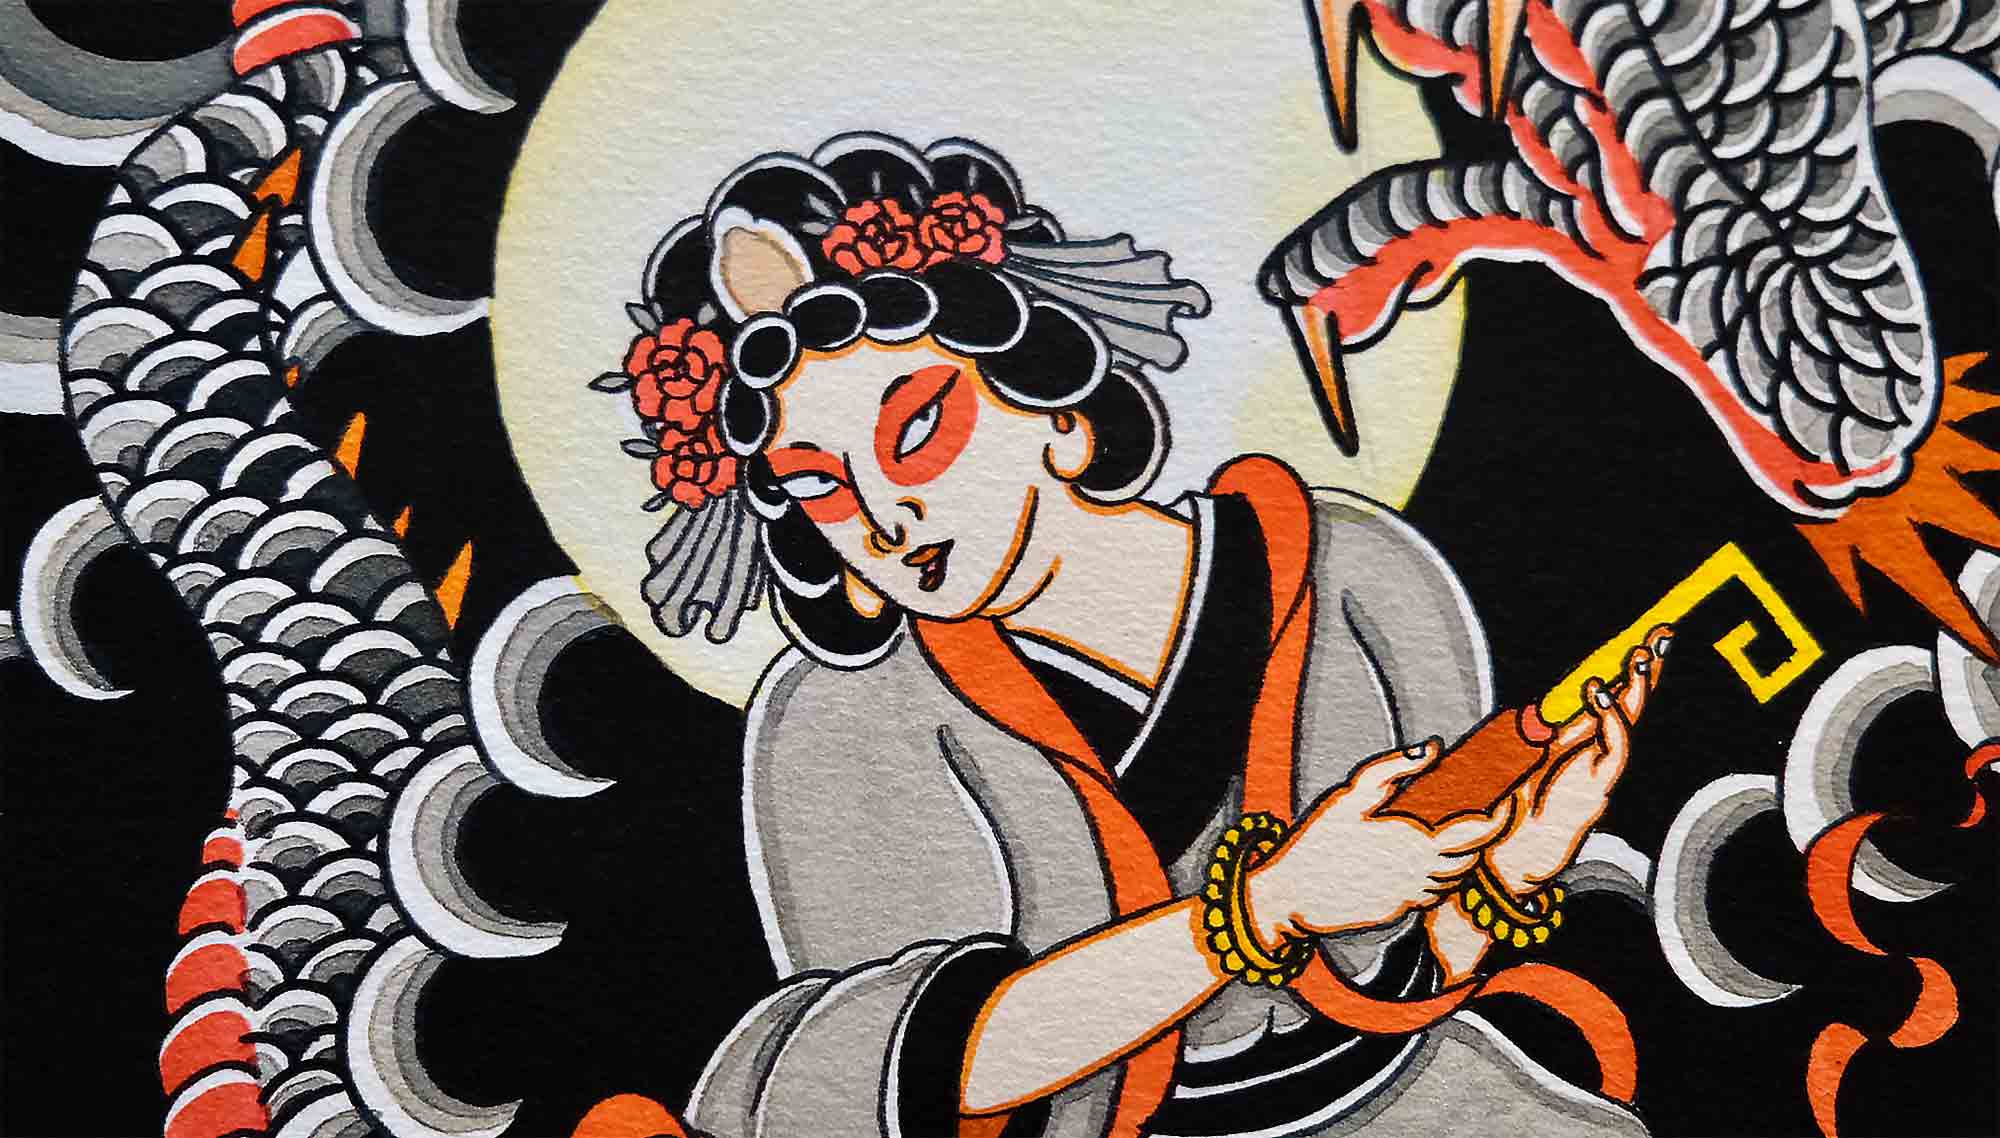 Benzaiten with a dragon painting